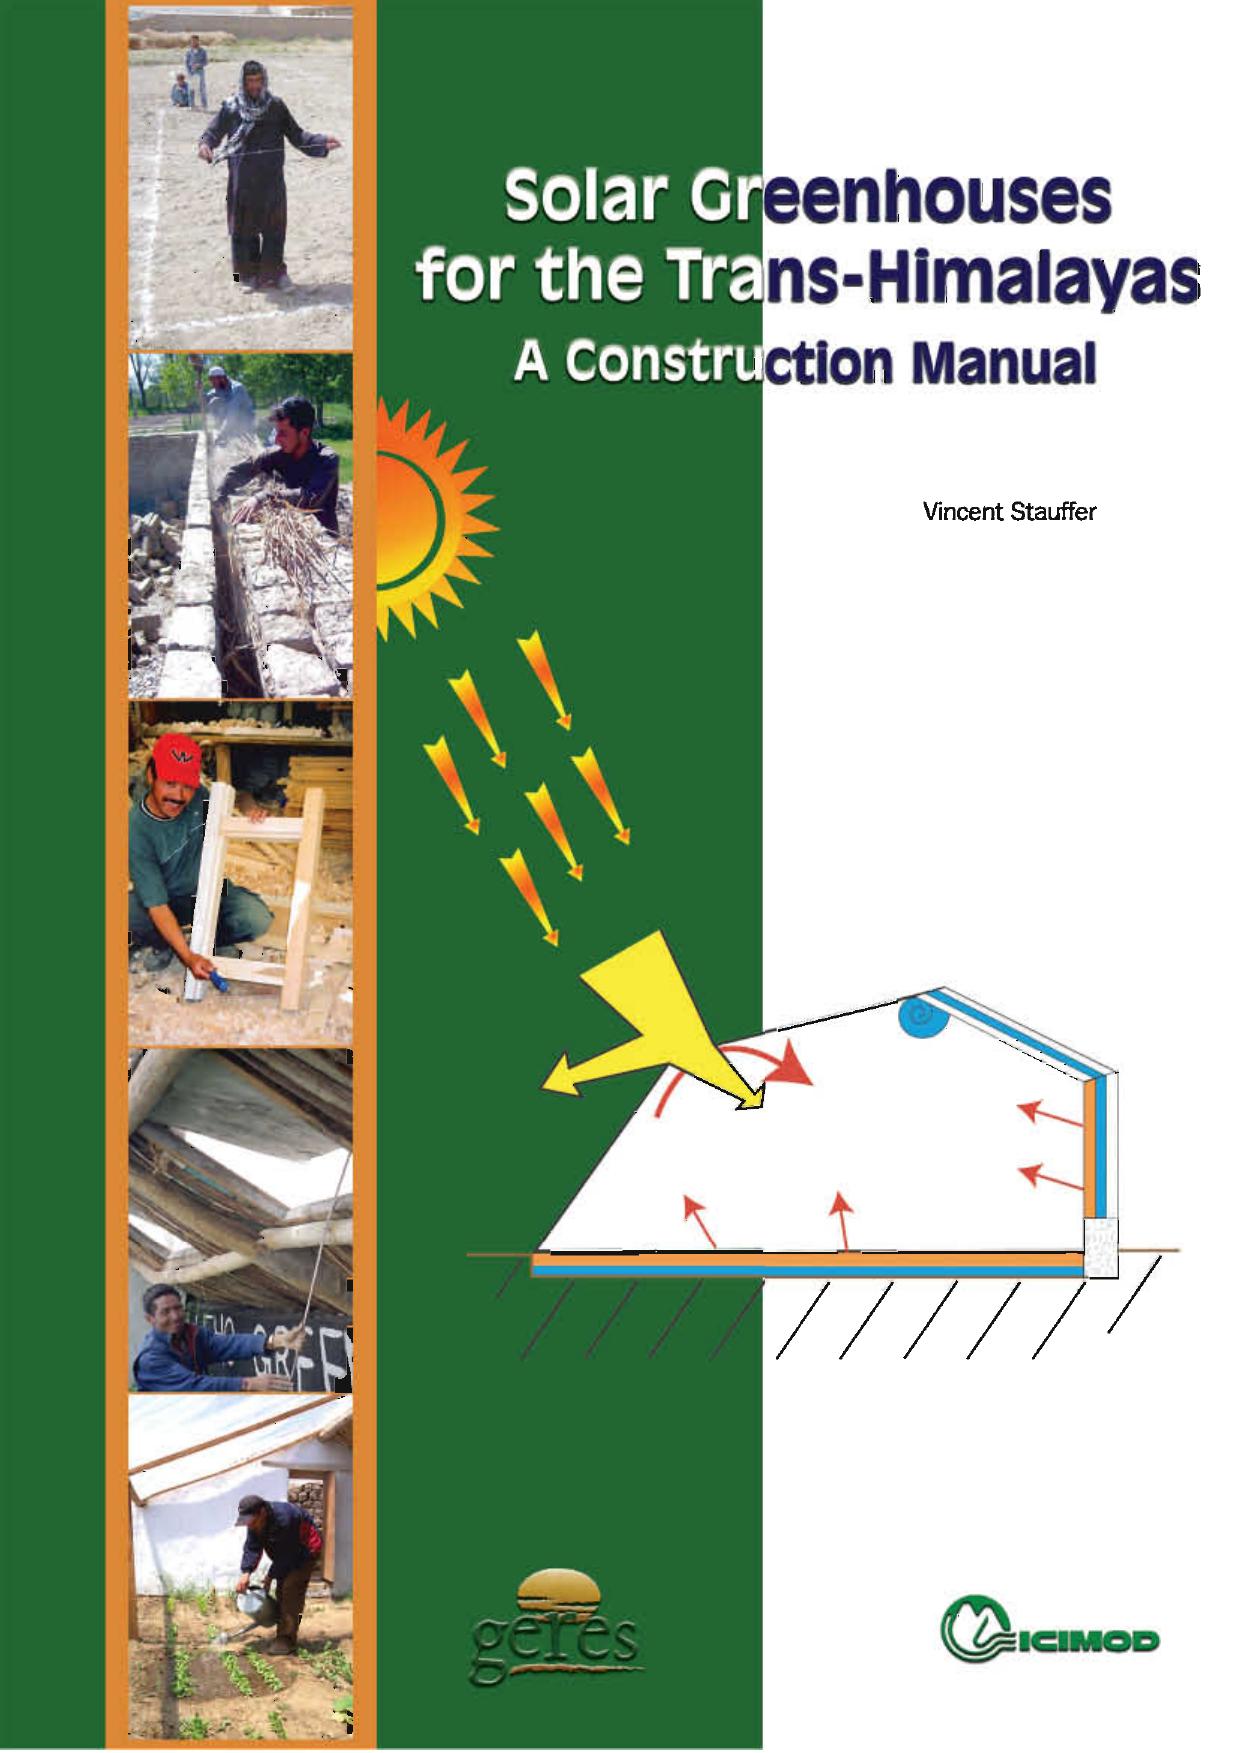 Solar Greenhouses for the Trans-Himalayas: A Construction Manual